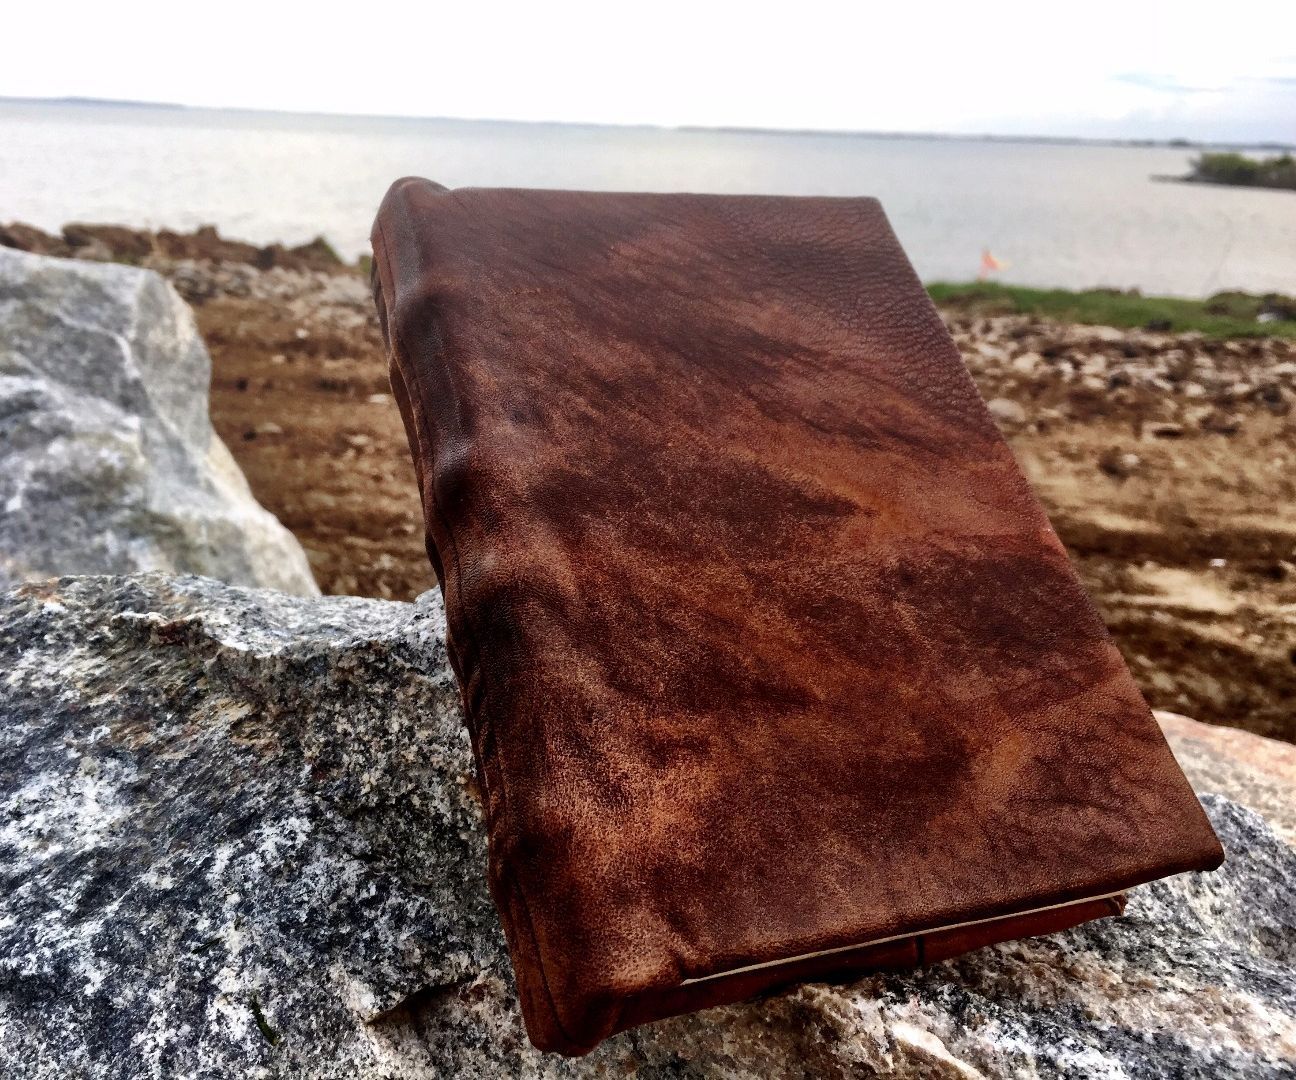 Leather-Bound Book From Scratch